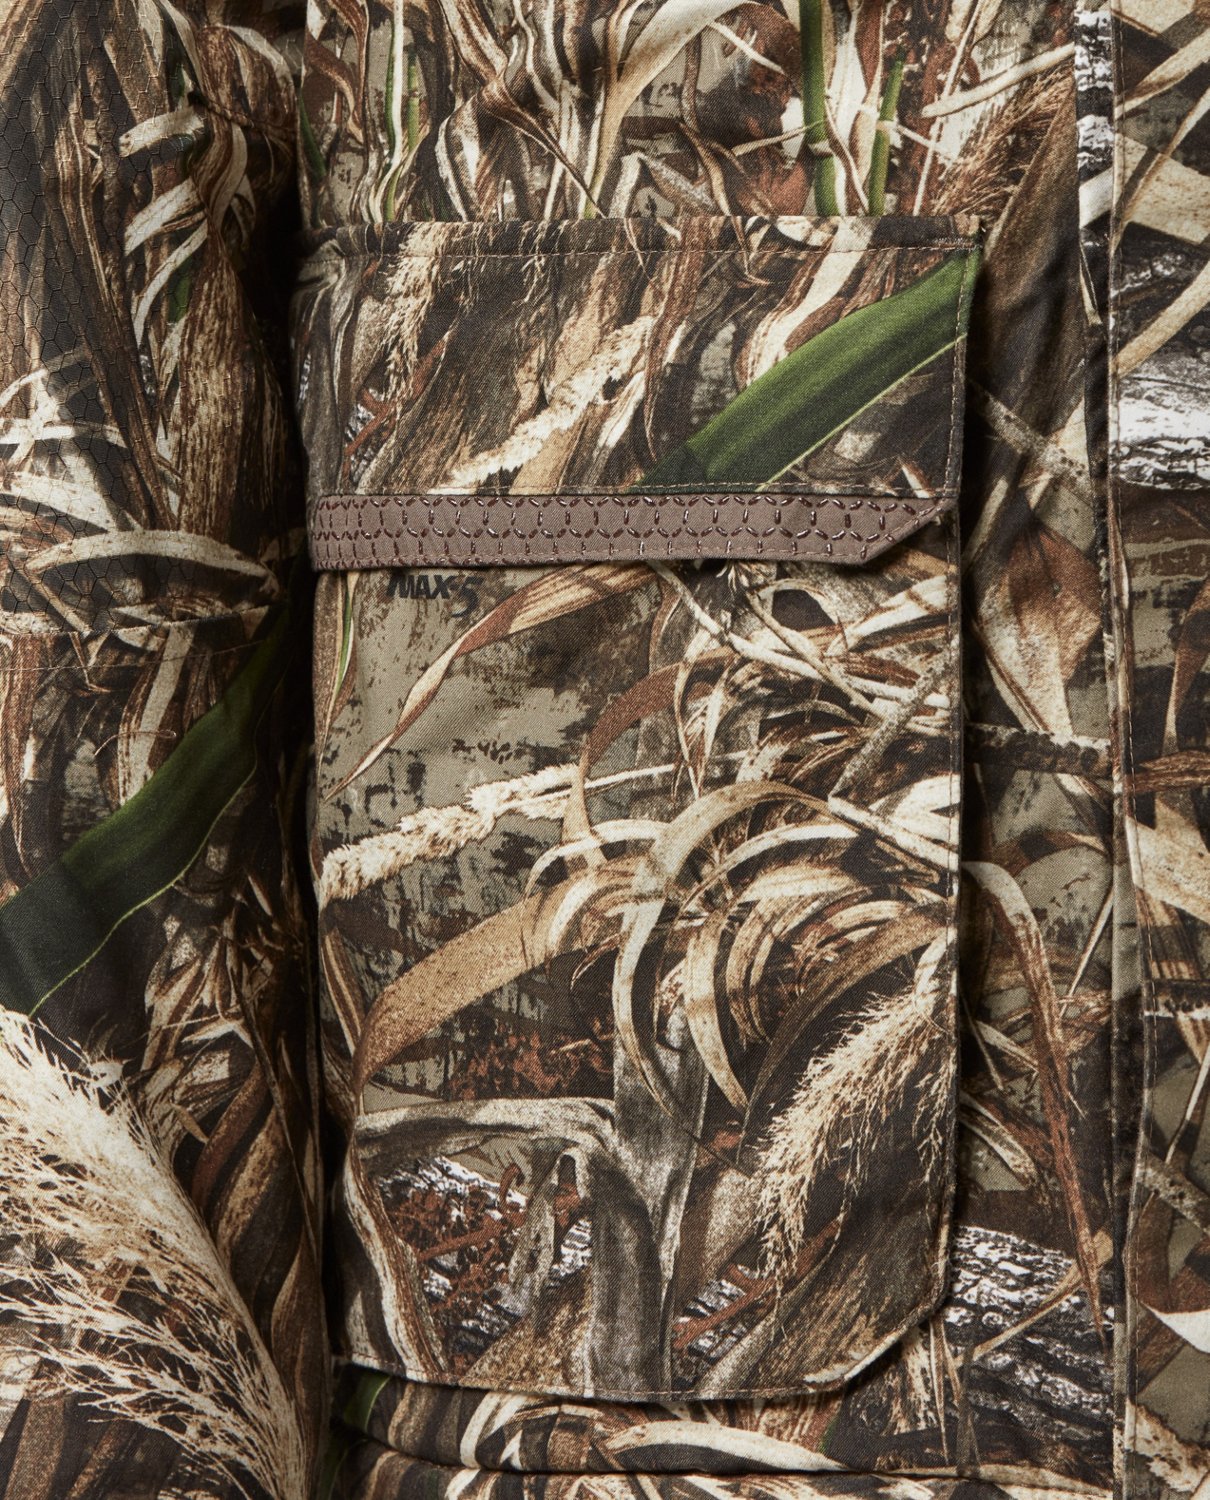 Magellan Outdoors Men's Pintail Waterfowl Insulated Jacket | Academy